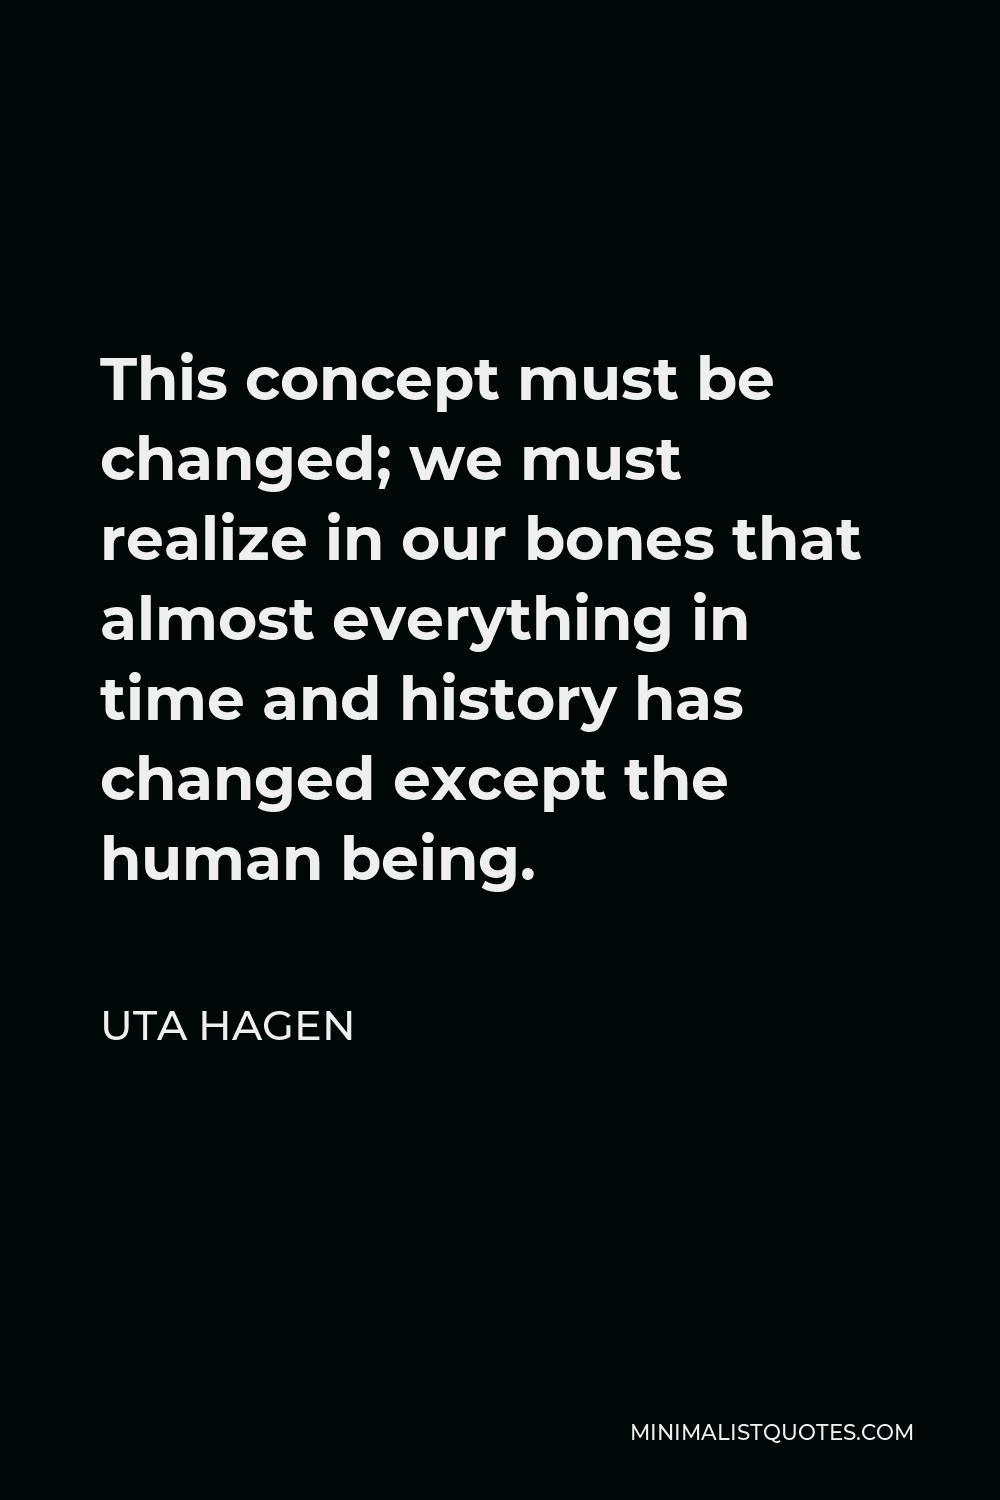 Uta Hagen Quote - This concept must be changed; we must realize in our bones that almost everything in time and history has changed except the human being.